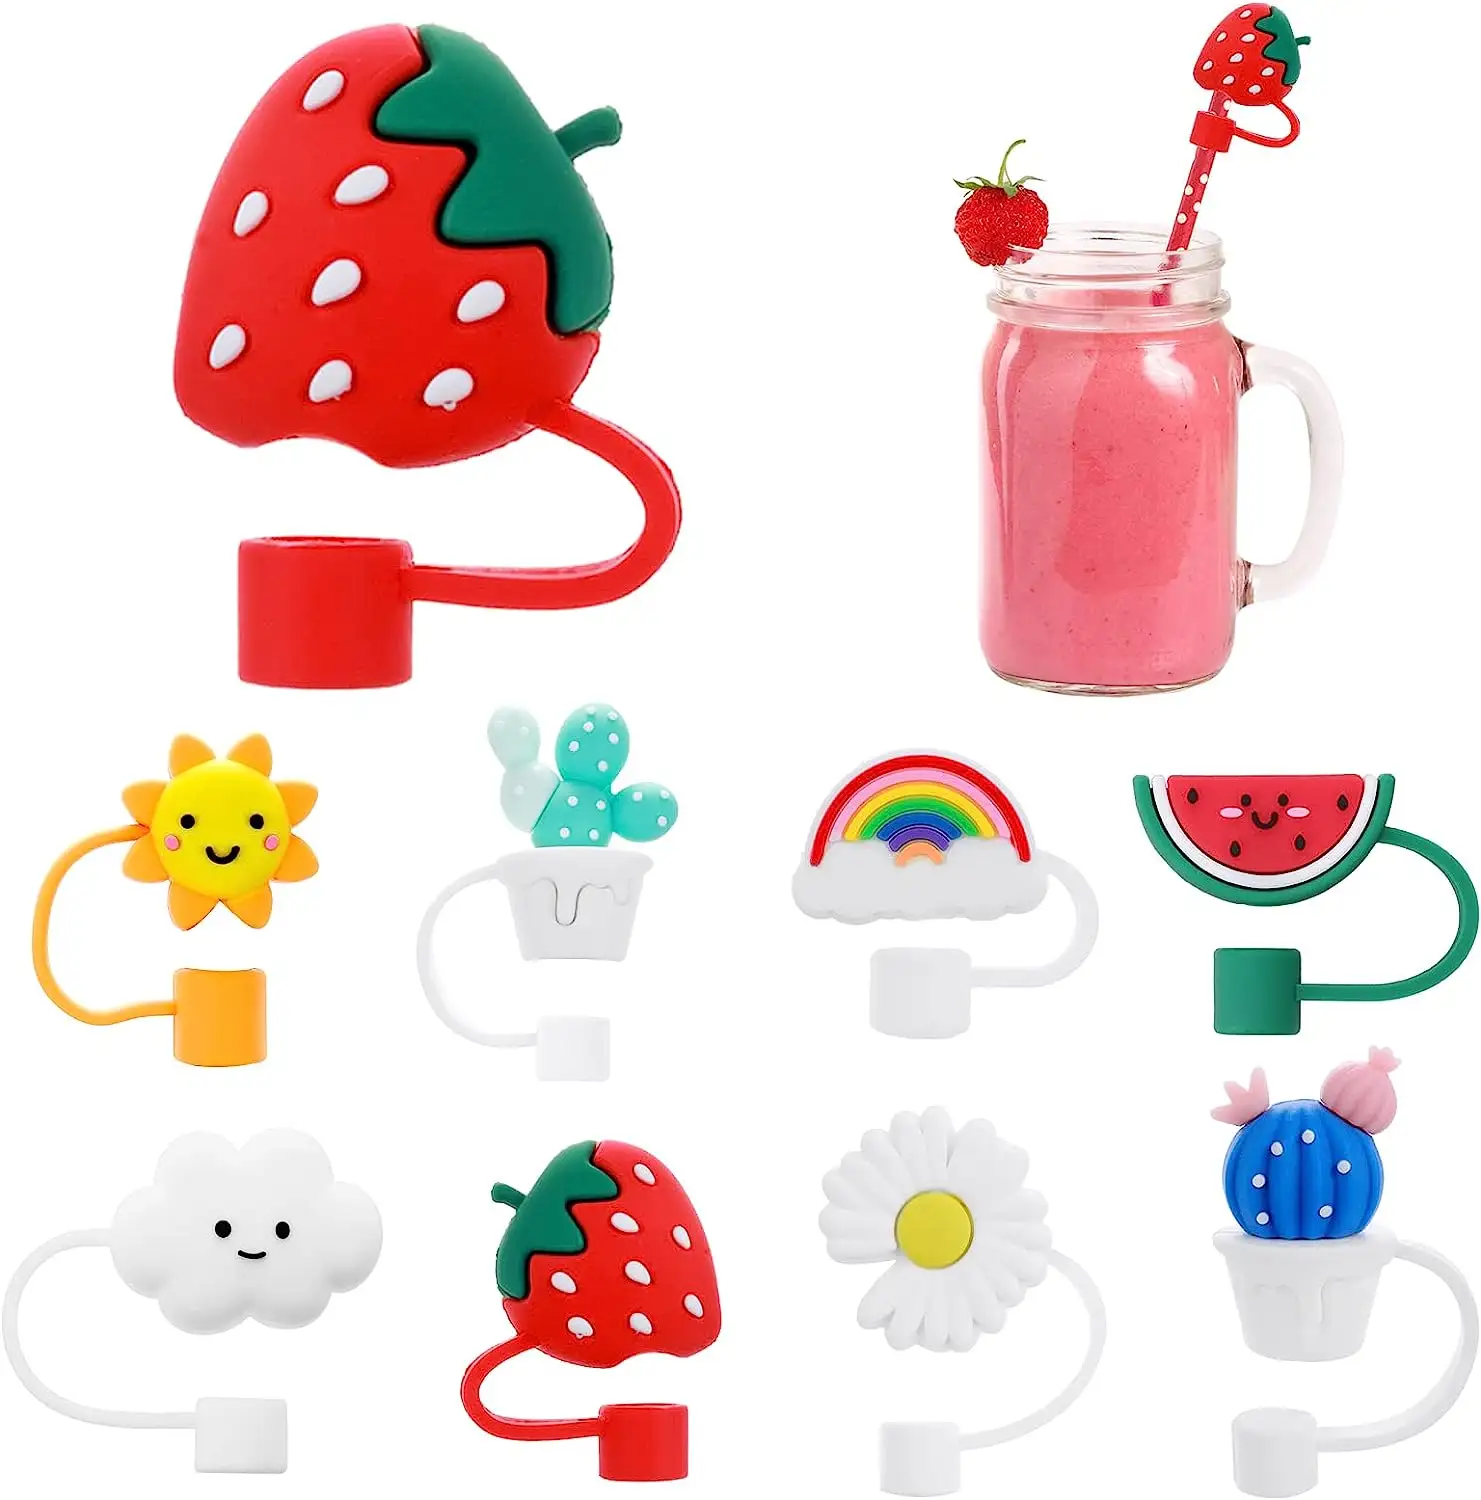 BPA-Free Cute Silicone Straw Cover Portable Dustproof Reusable Drinking Straw Tips for 8-10mm Straws Bar Accessories